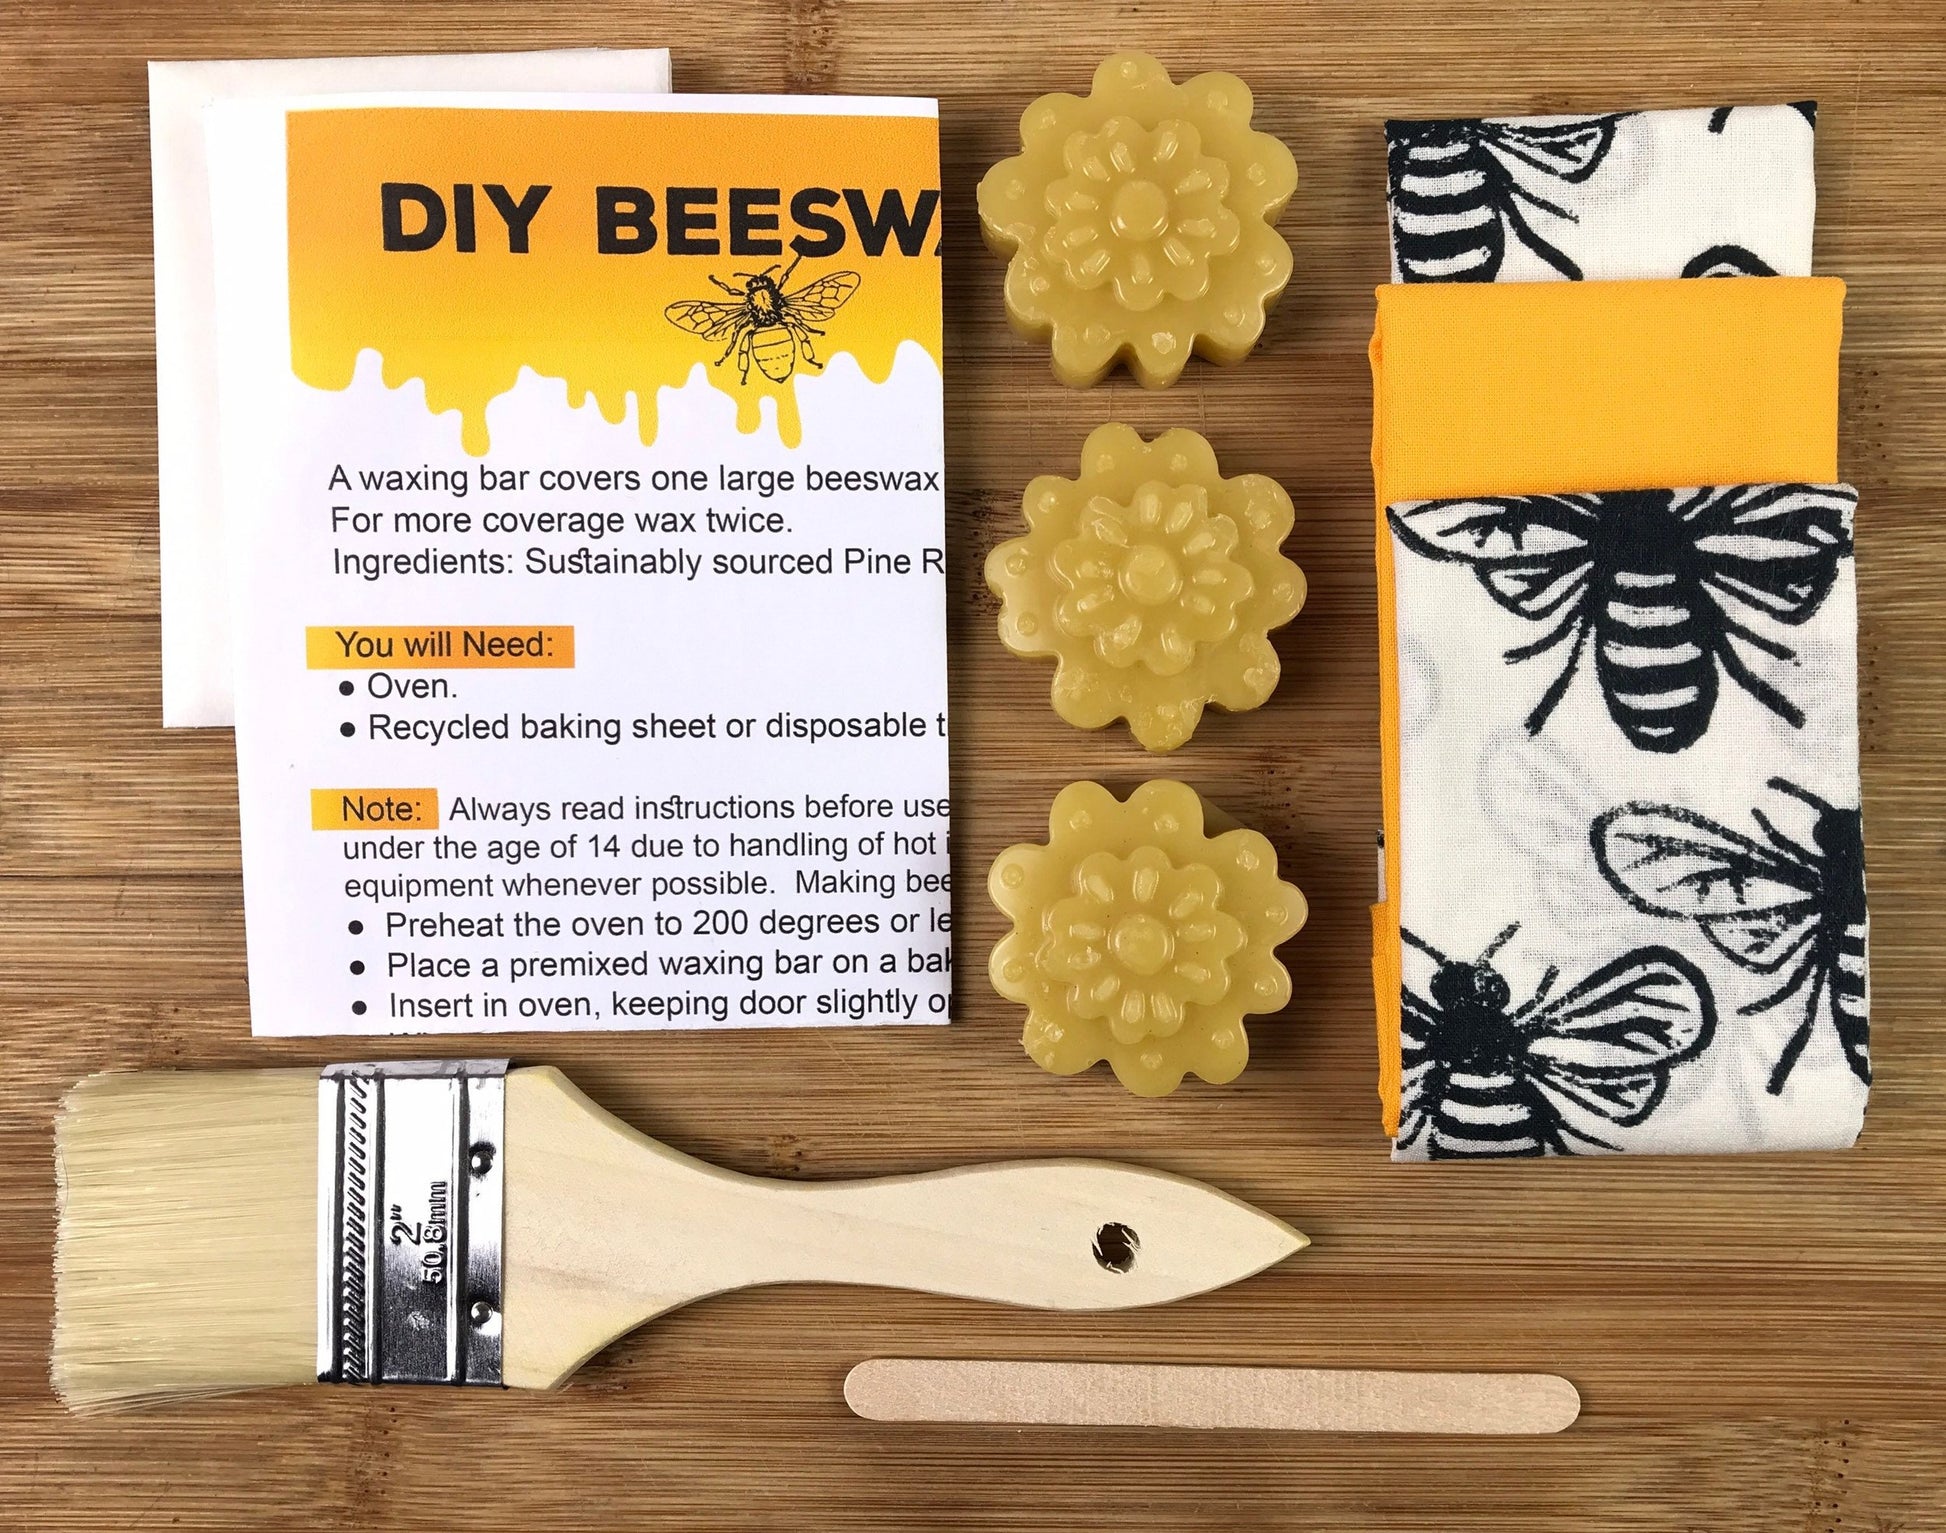 Beeswax Wrap Packaging Download PDF – Jenny Joys Soap